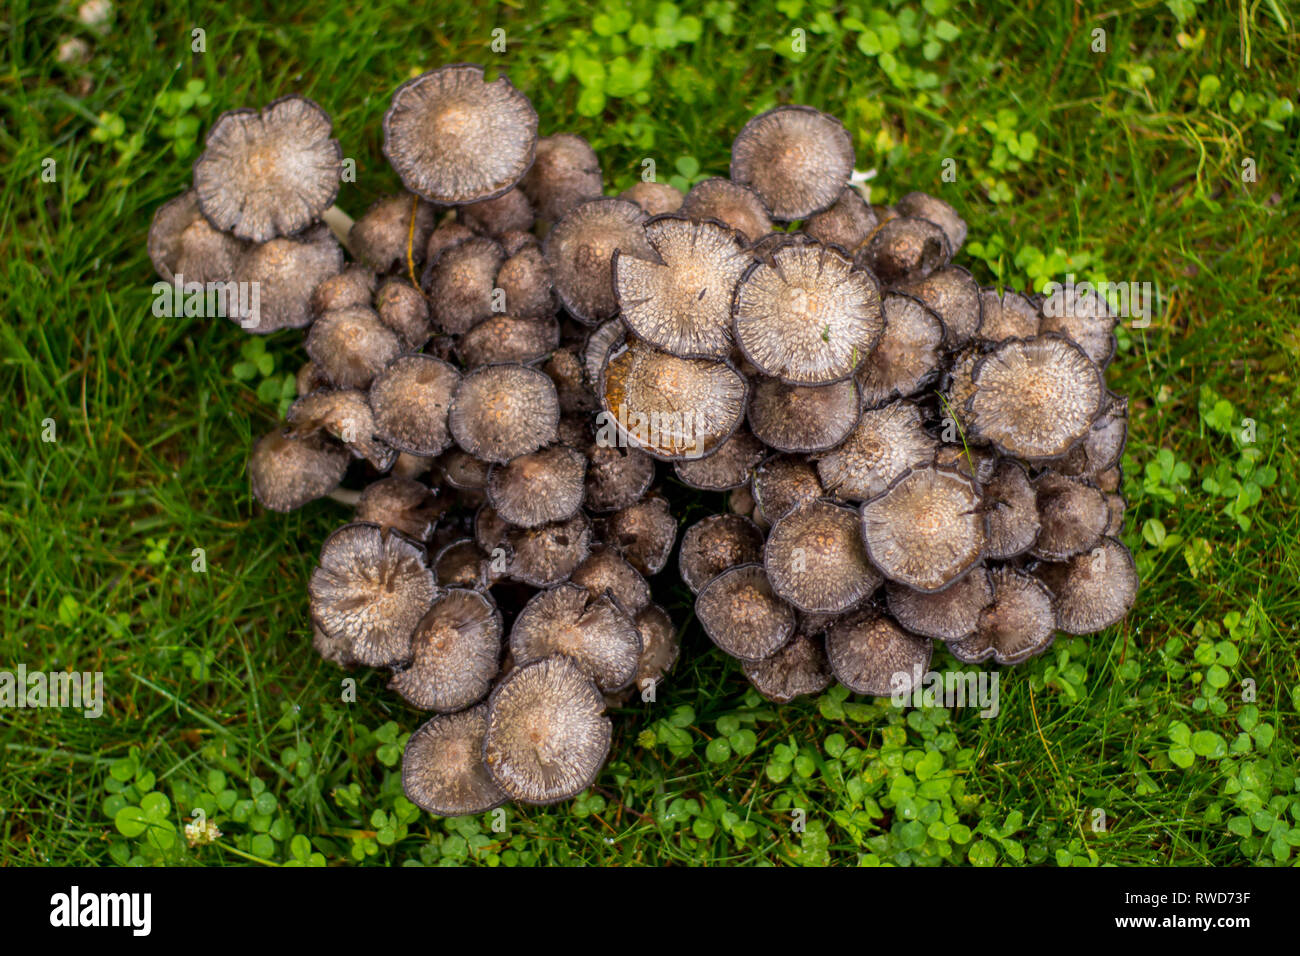 cluster of mushrooms after the rain Stock Photo